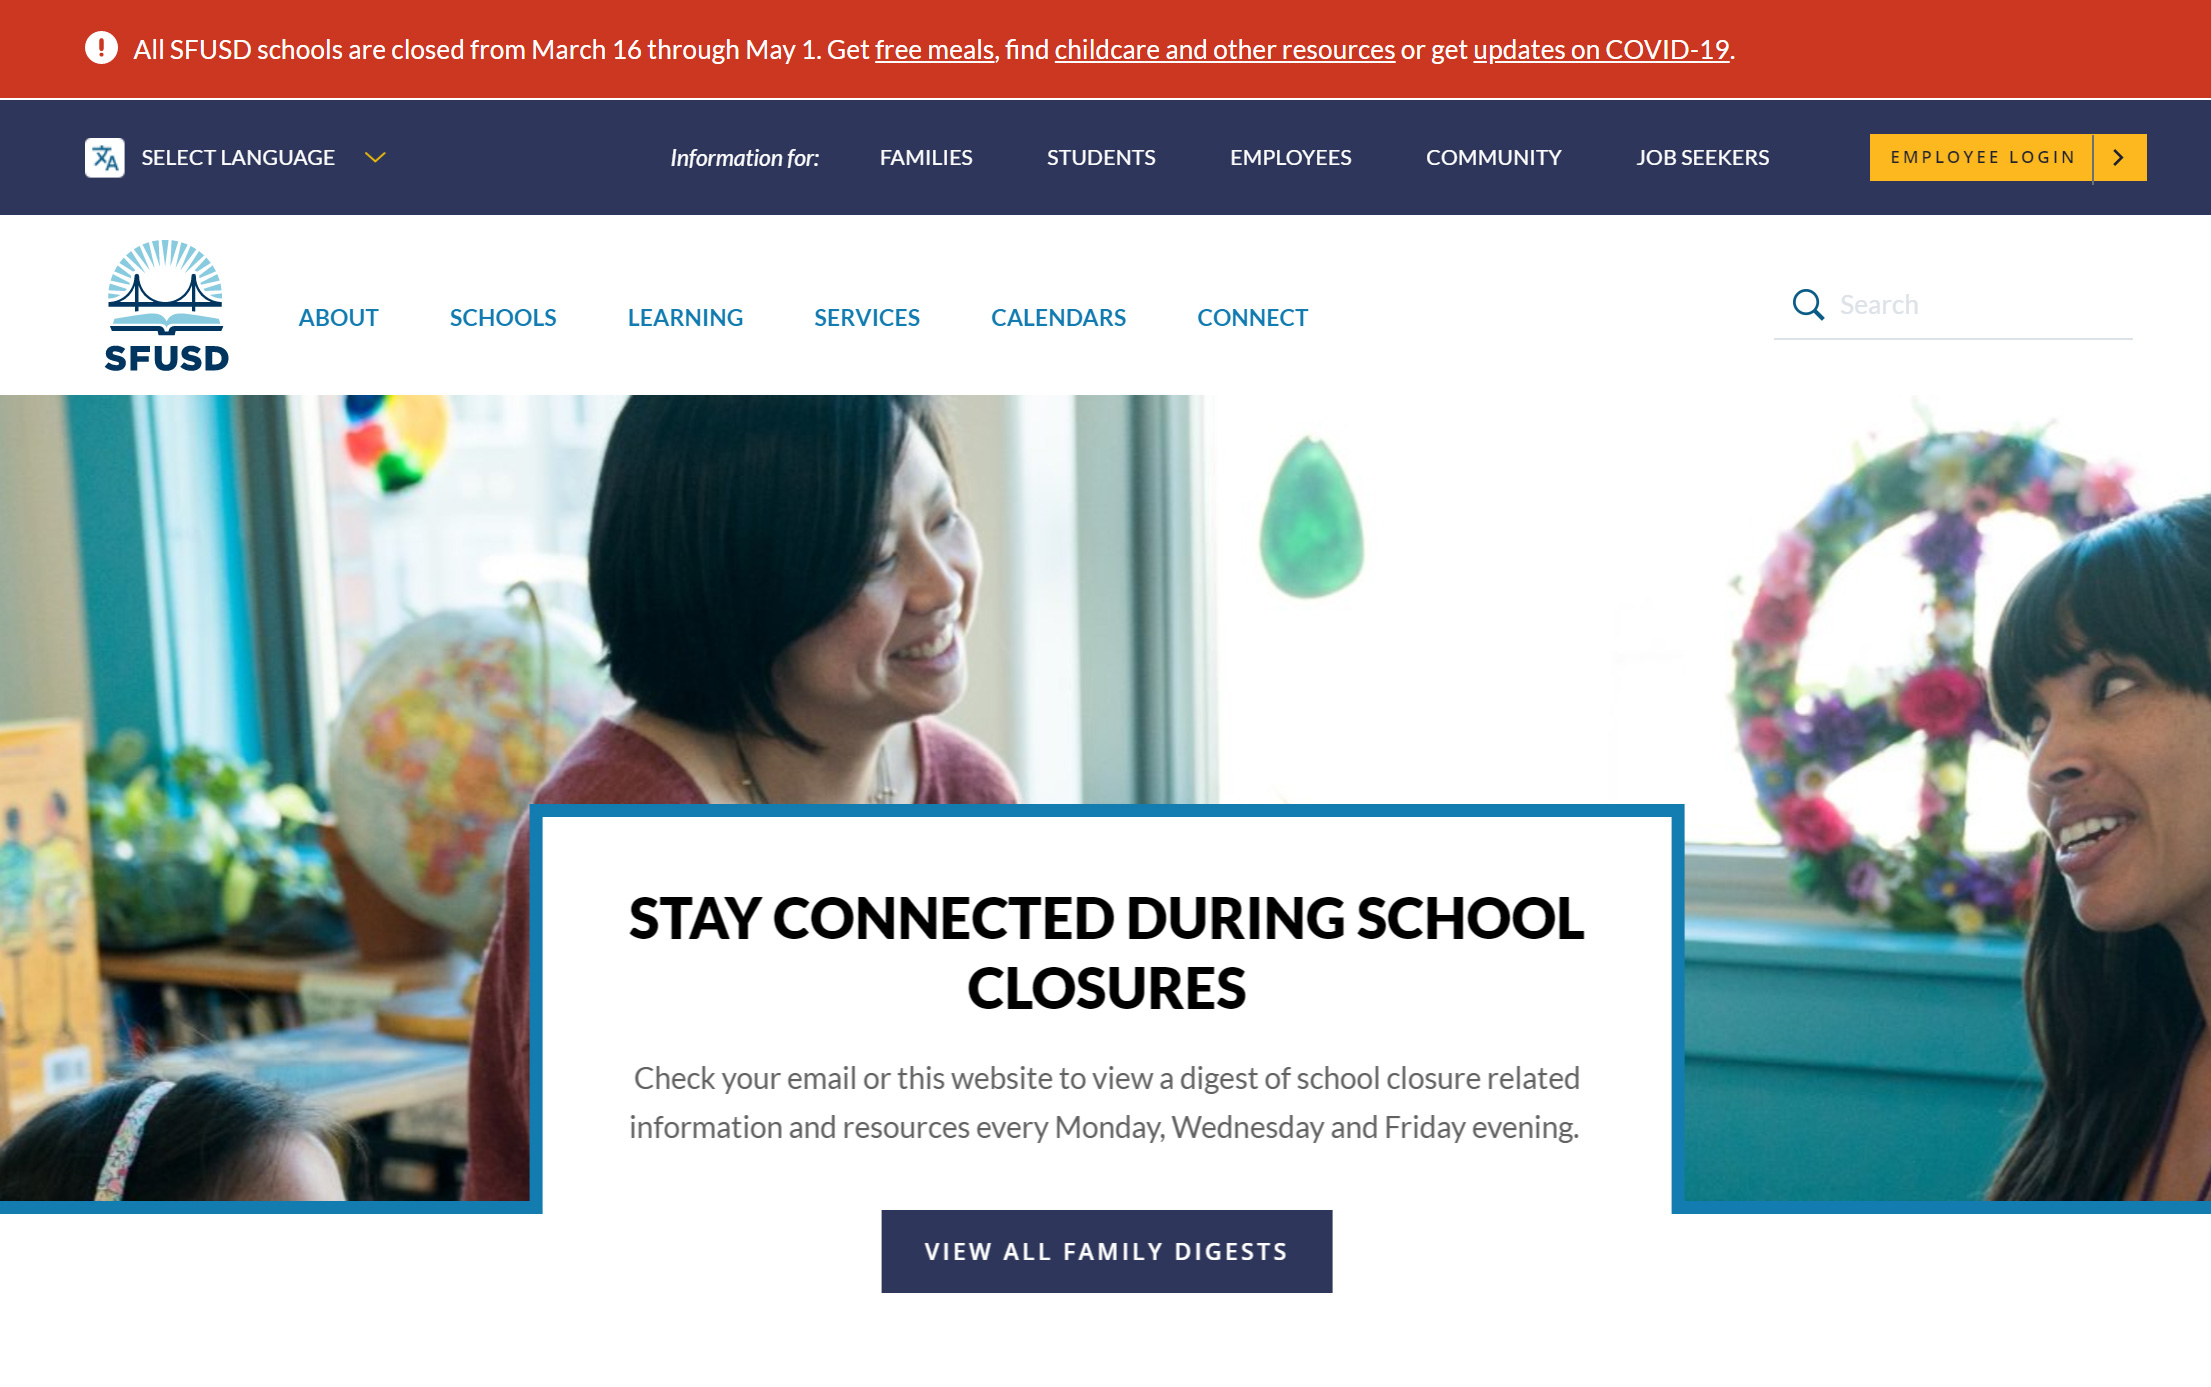 SFUSD is prominently displaying an alert message on all the pages of their website, featuring timely details and links to vital resources.